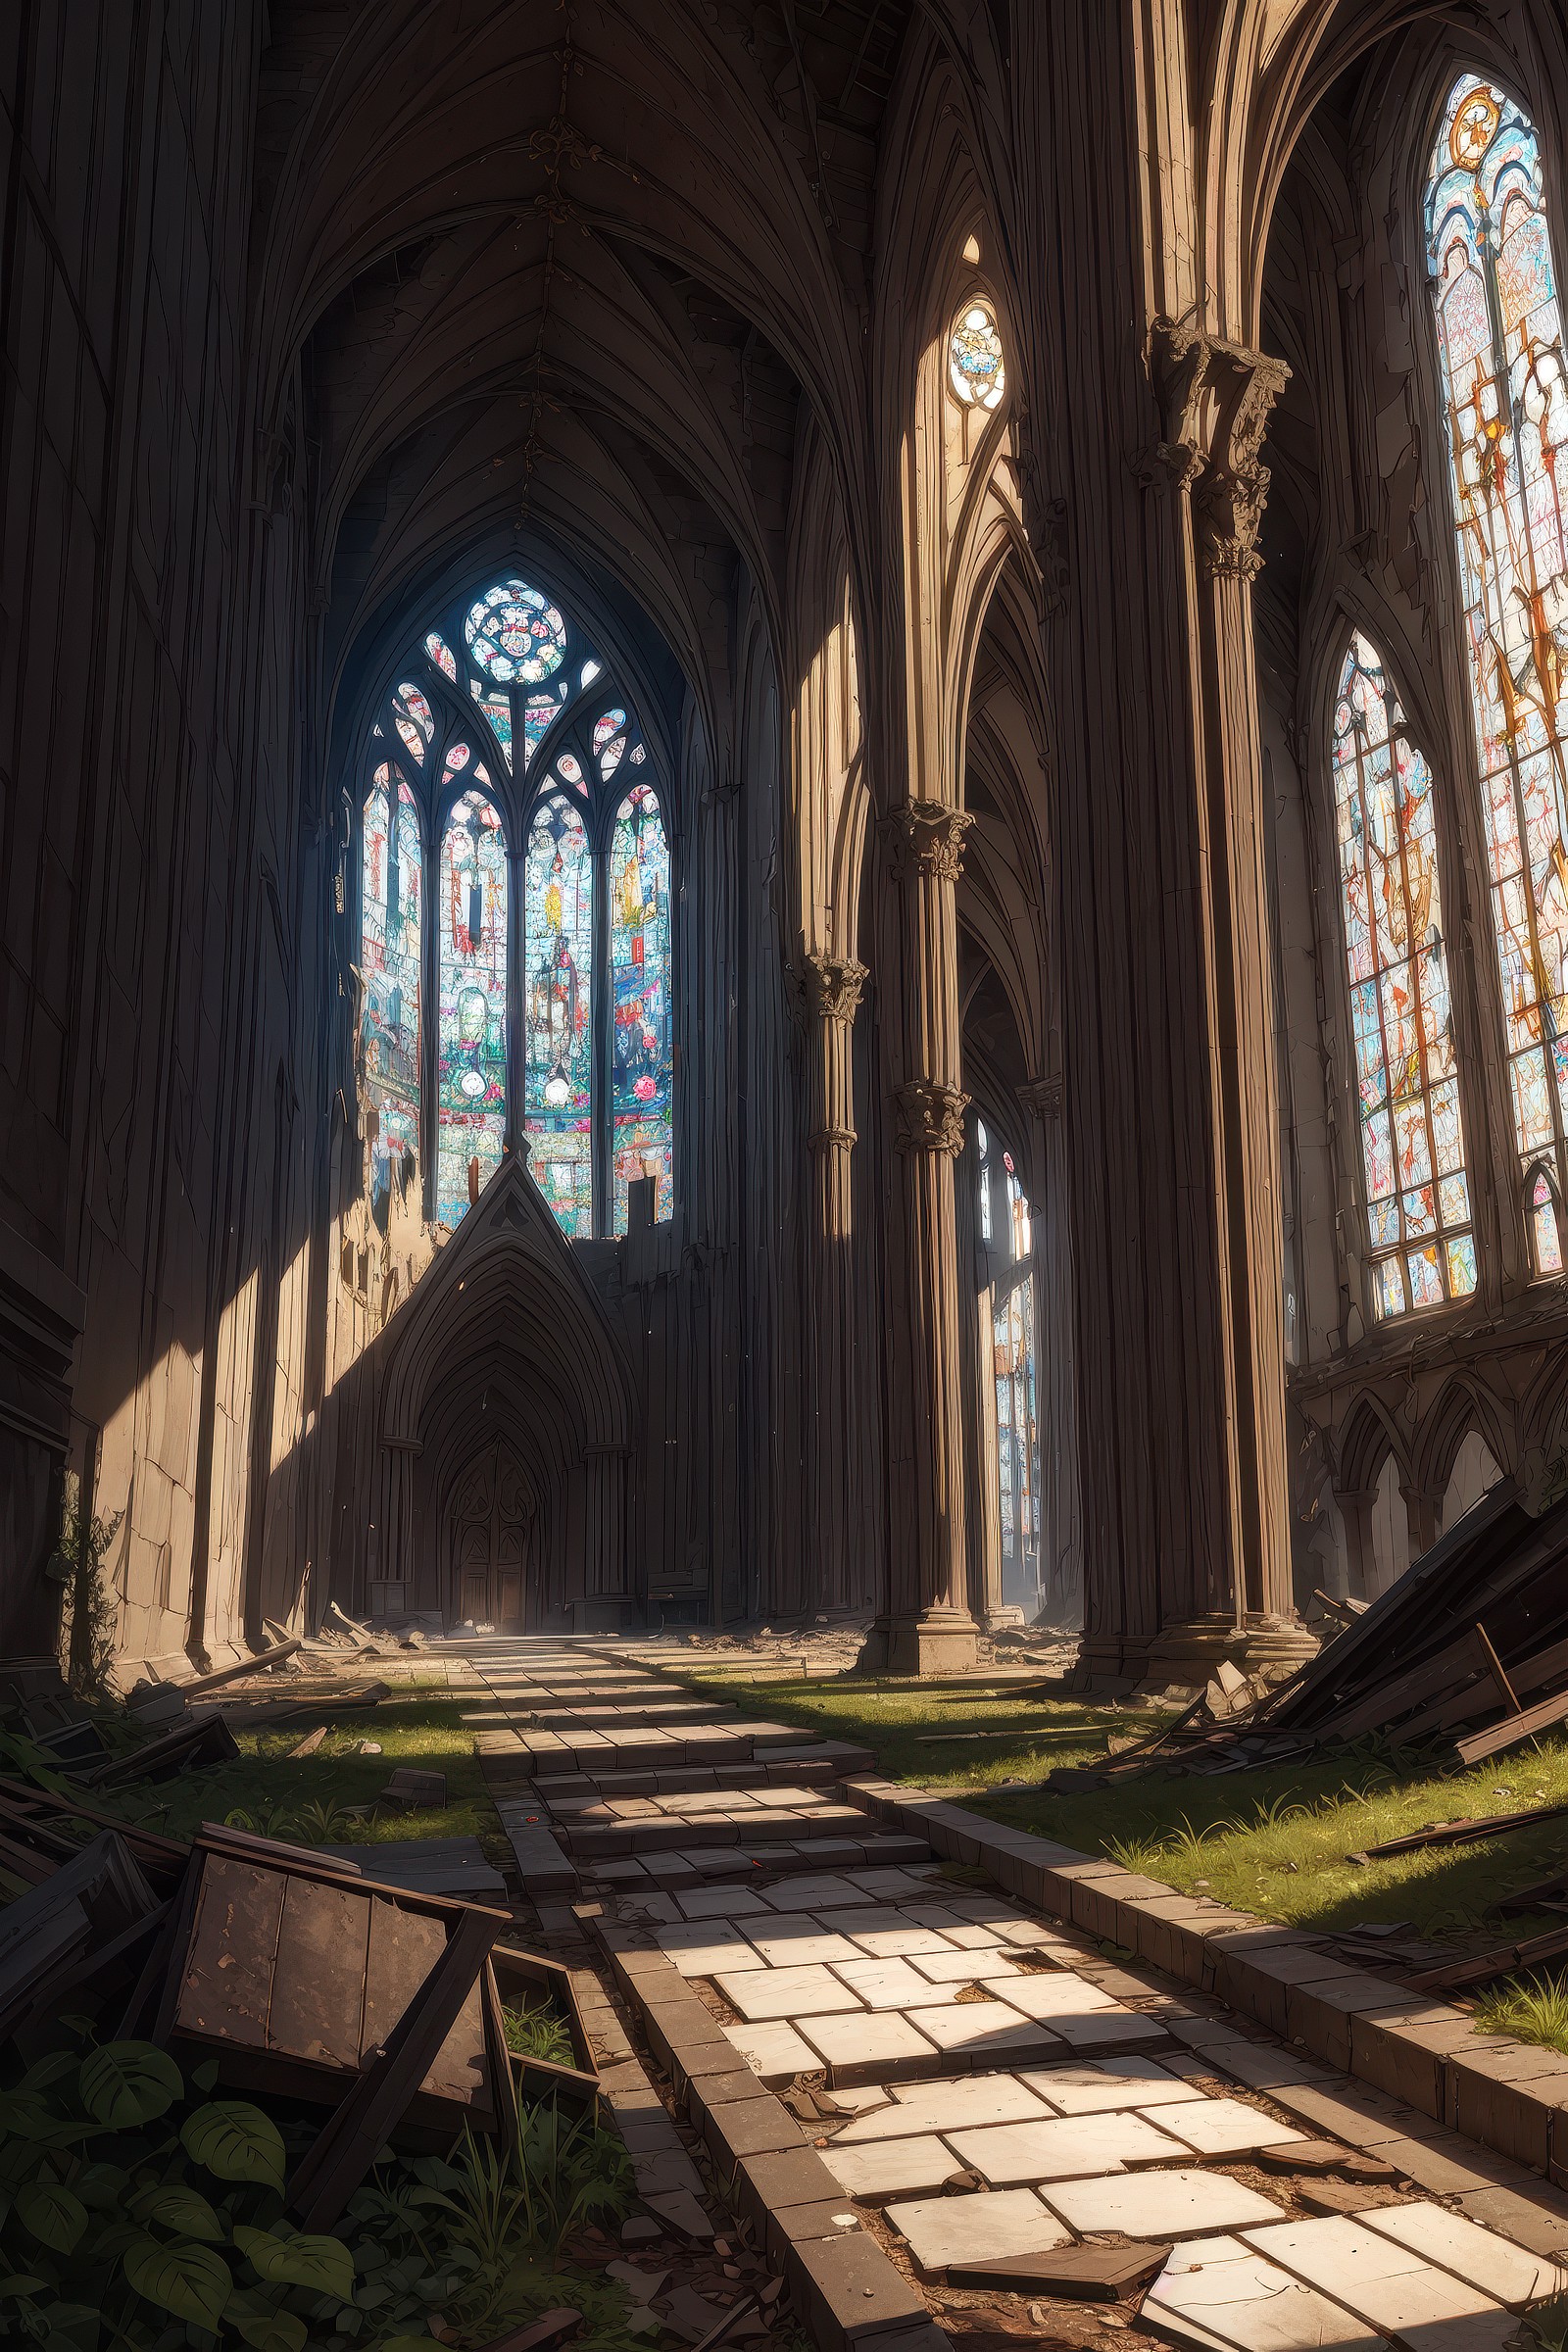 Sunny summer day, Post-apocalyptic ruins, A shattered cathedral with overgrown foliage, Sunlight piercing through broken s...